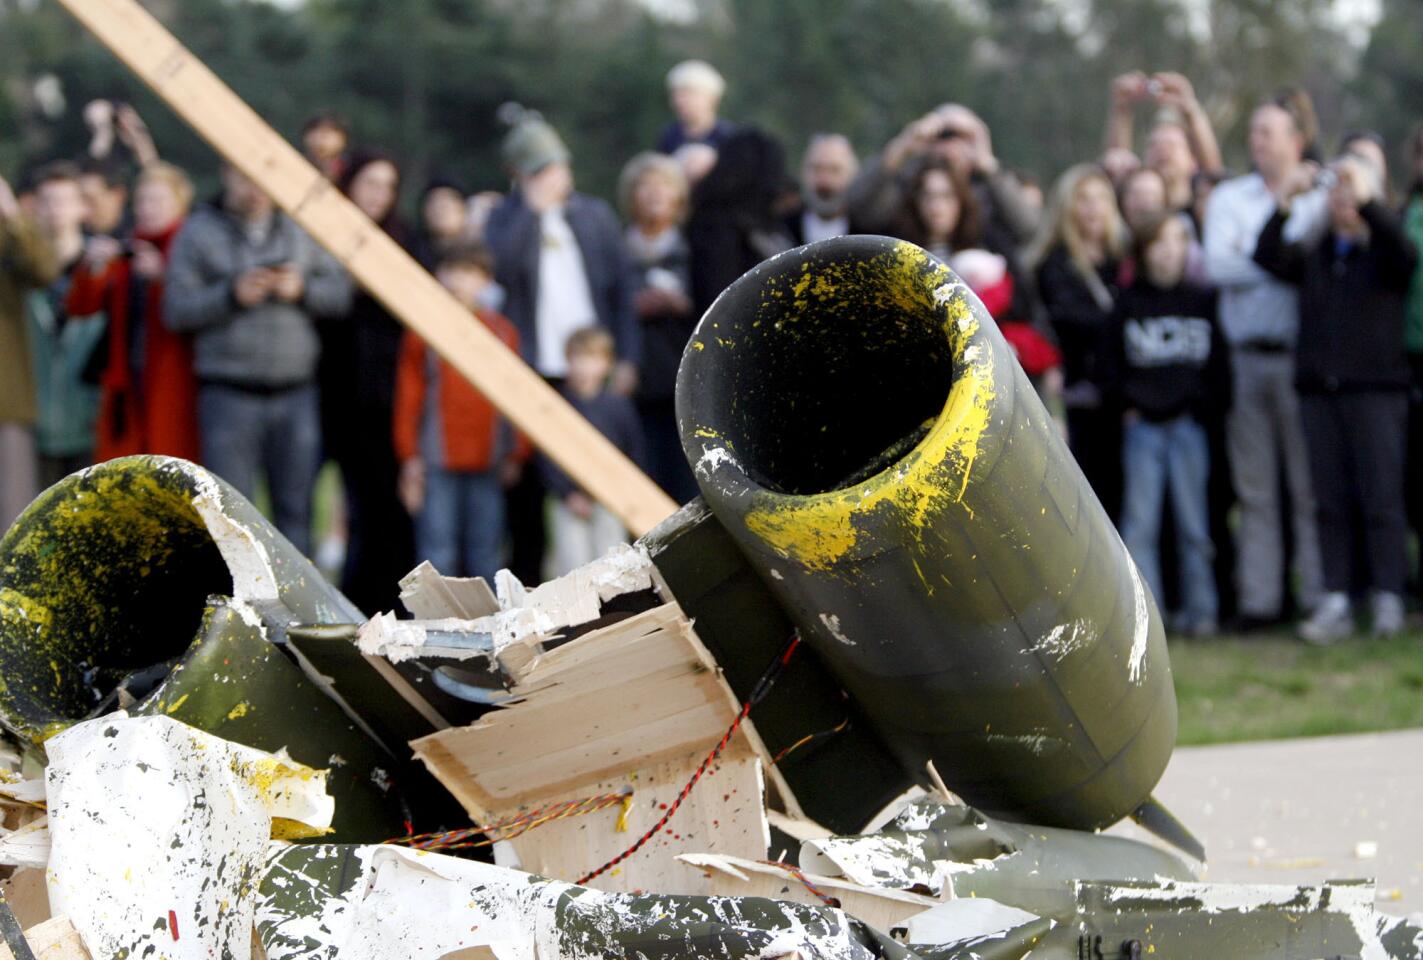 Photo Gallery: Art plane crashes, paints canvas at Rose Bowl